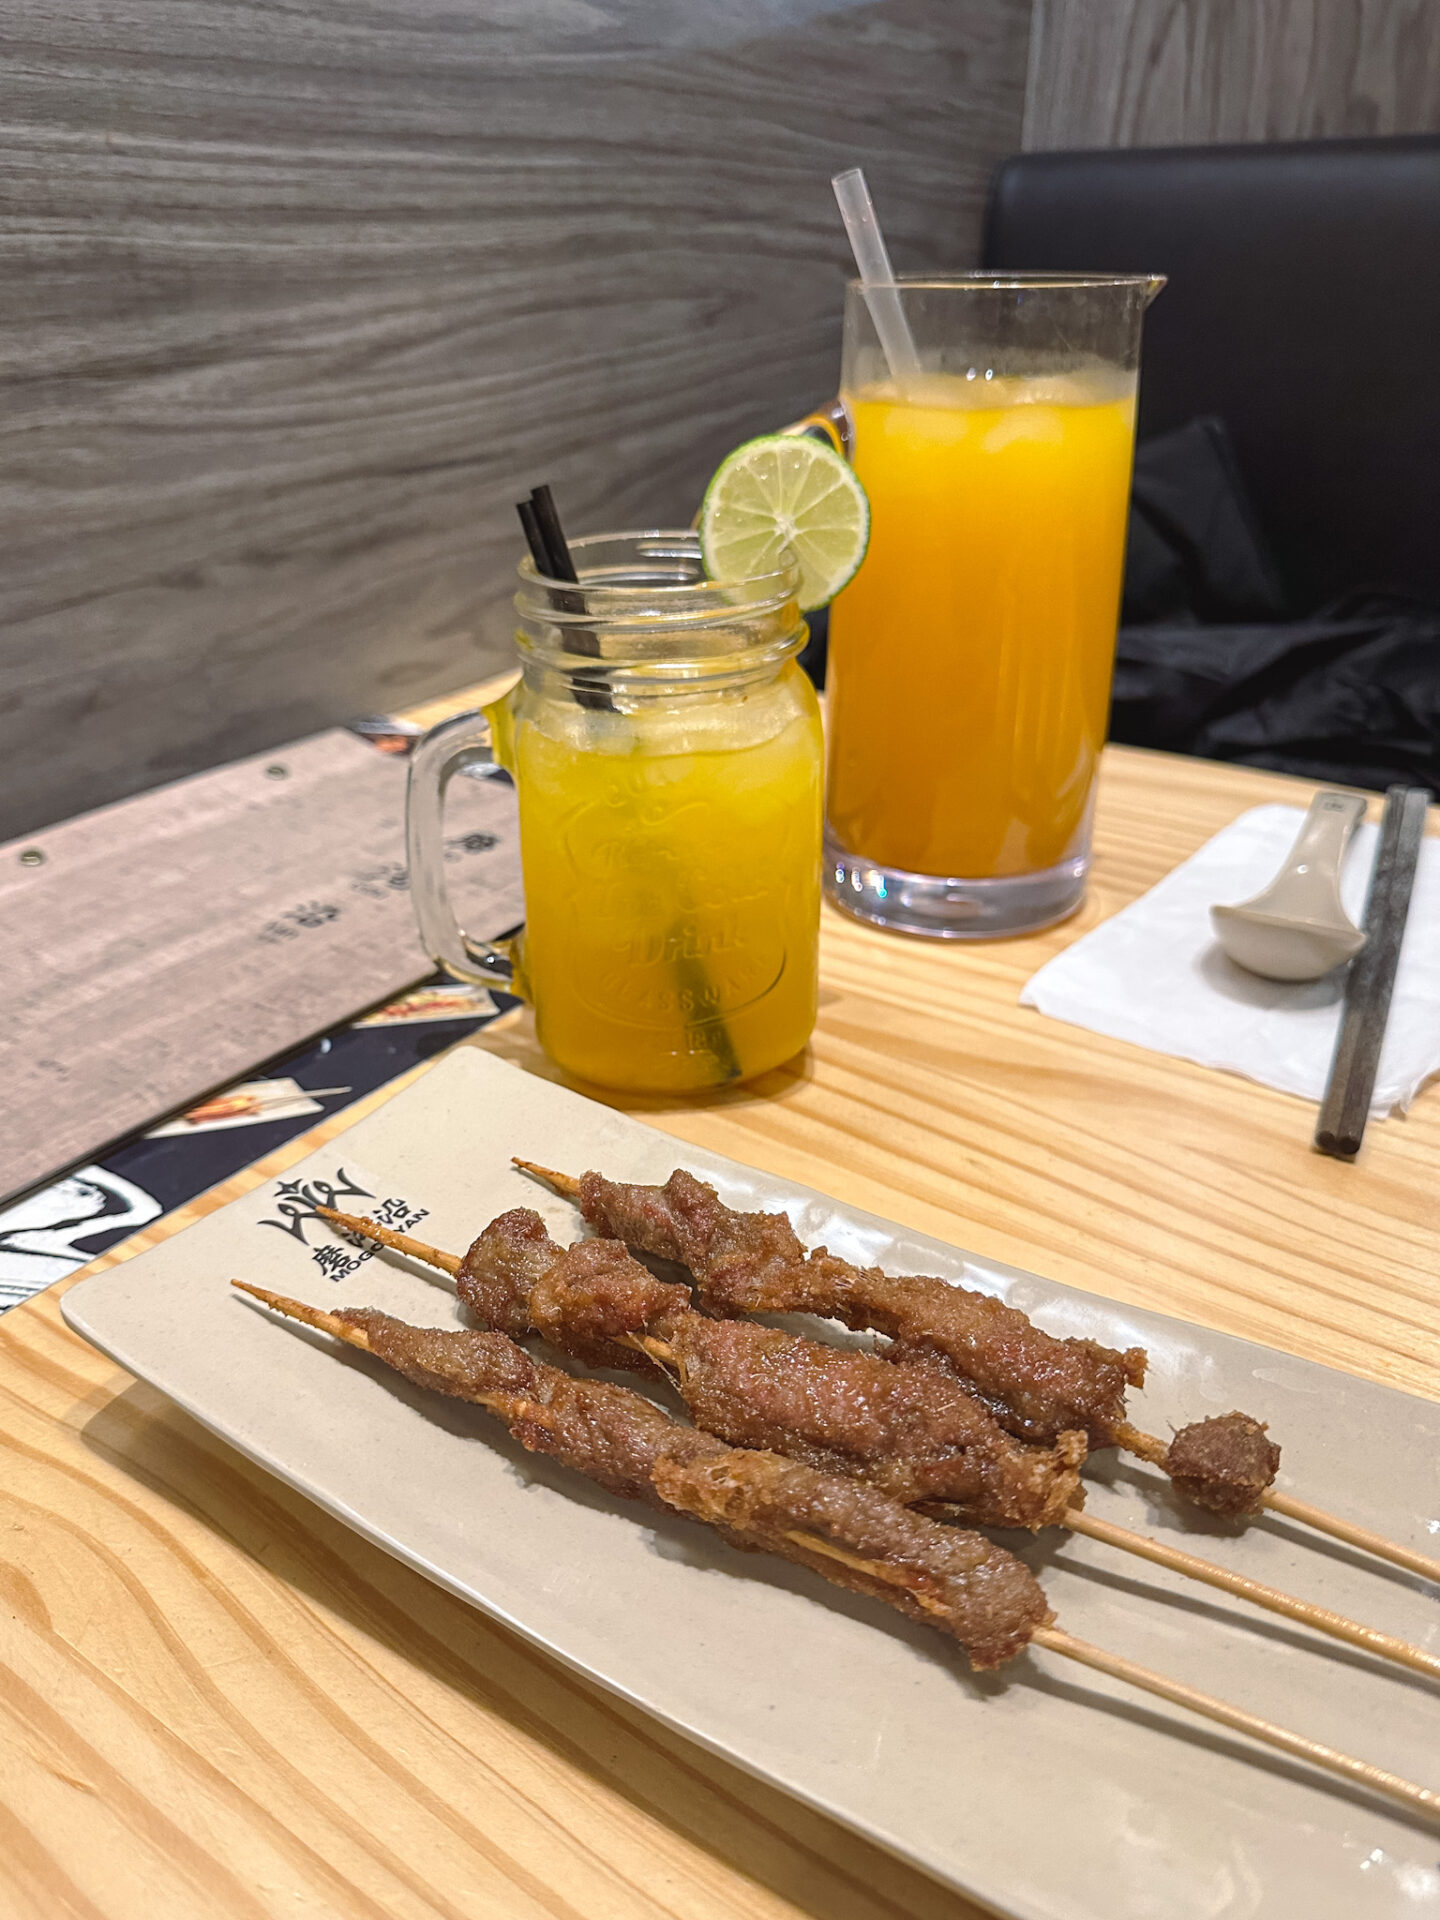 Lamb Skewers from Mogouyan Hand Pulled Noodle in Toronto